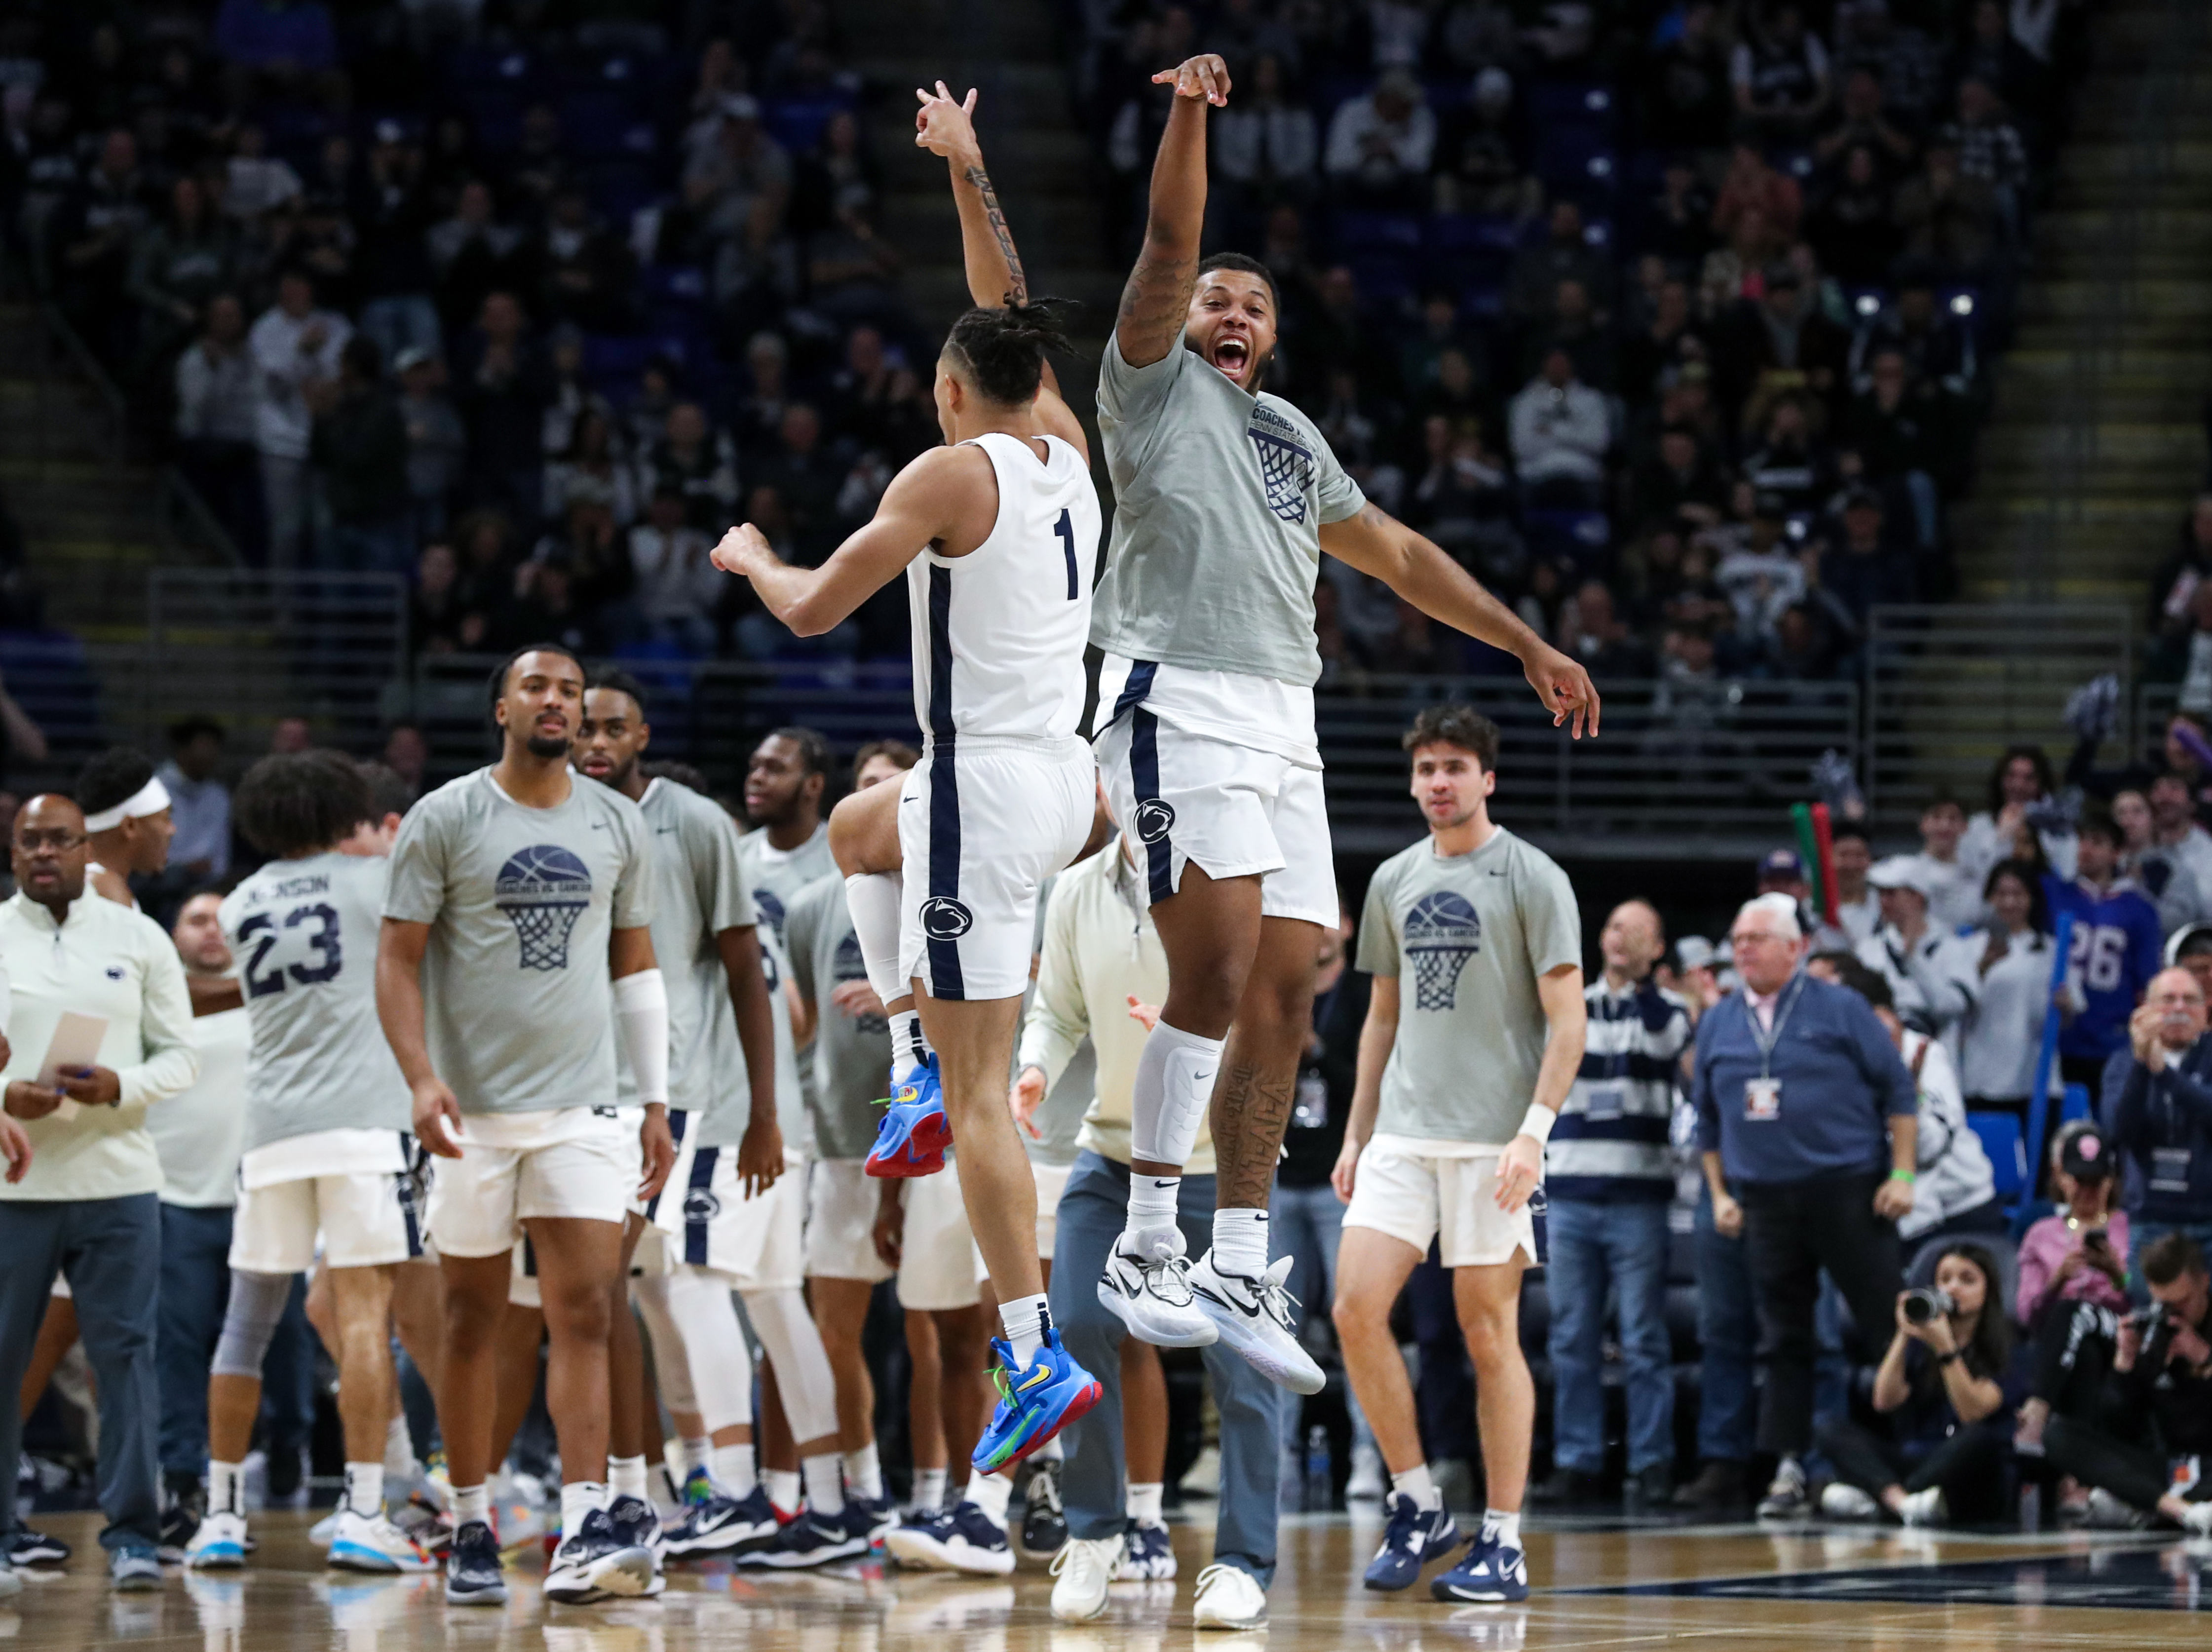 Jan 21, 2023; University Park, Pennsylvania, USA; Penn State Nittany Lions guard/forward Myles Dread (right) reacts after guard/forward Seth Lundy (1) made a three point shot prior to a timeout during the first half against the Nebraska Cornhuskers at Bryce Jordan Center.